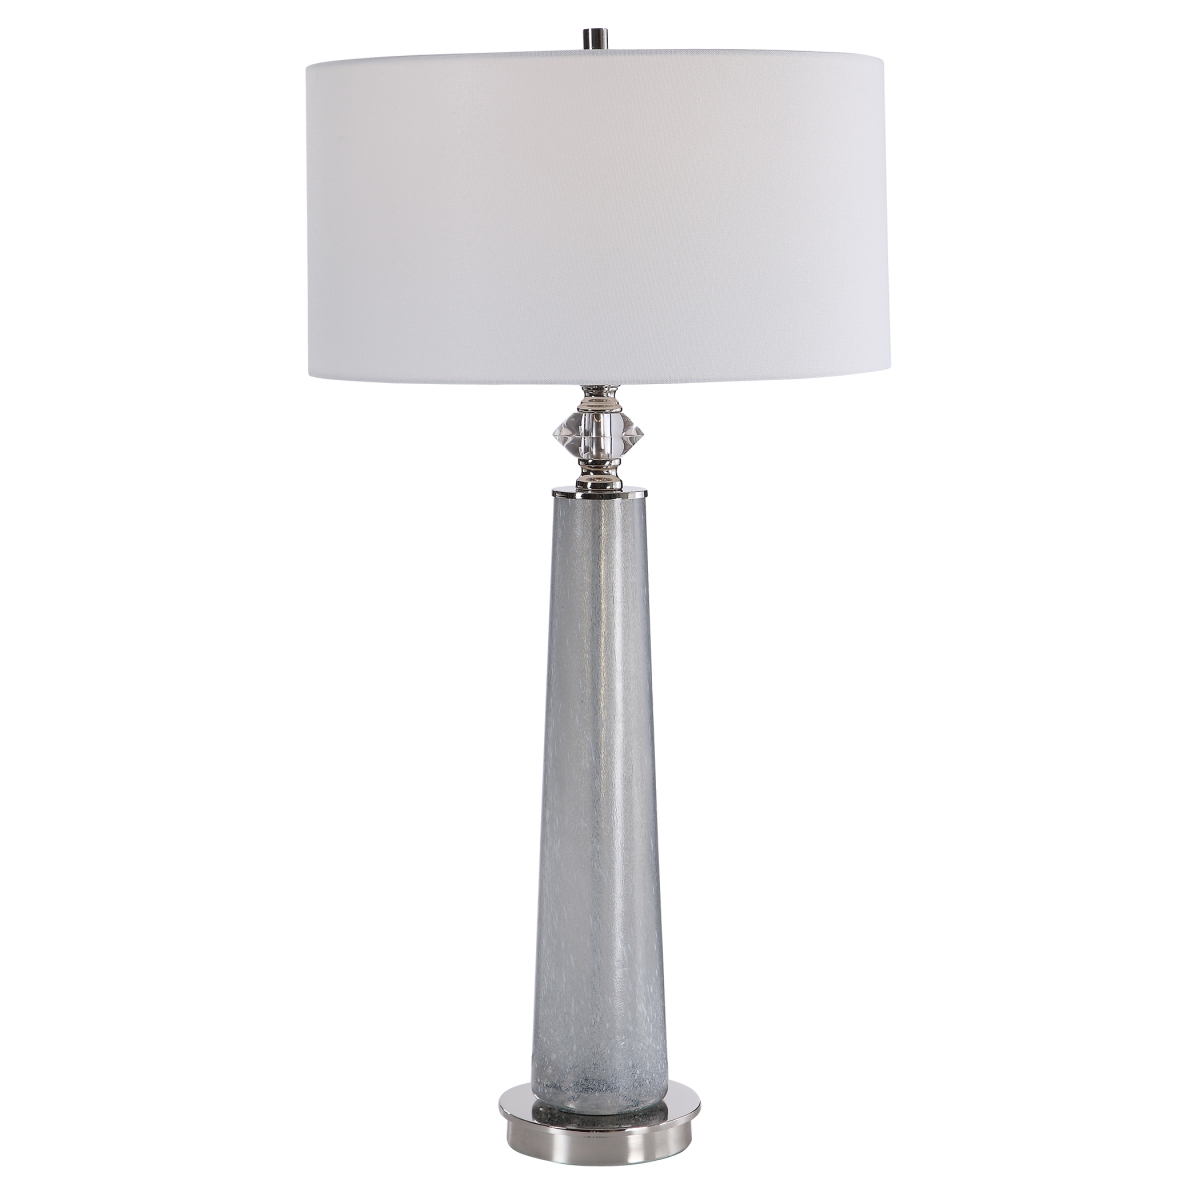 Picture of 212 Main 26378 Grayton Frosted Art Table Lamp